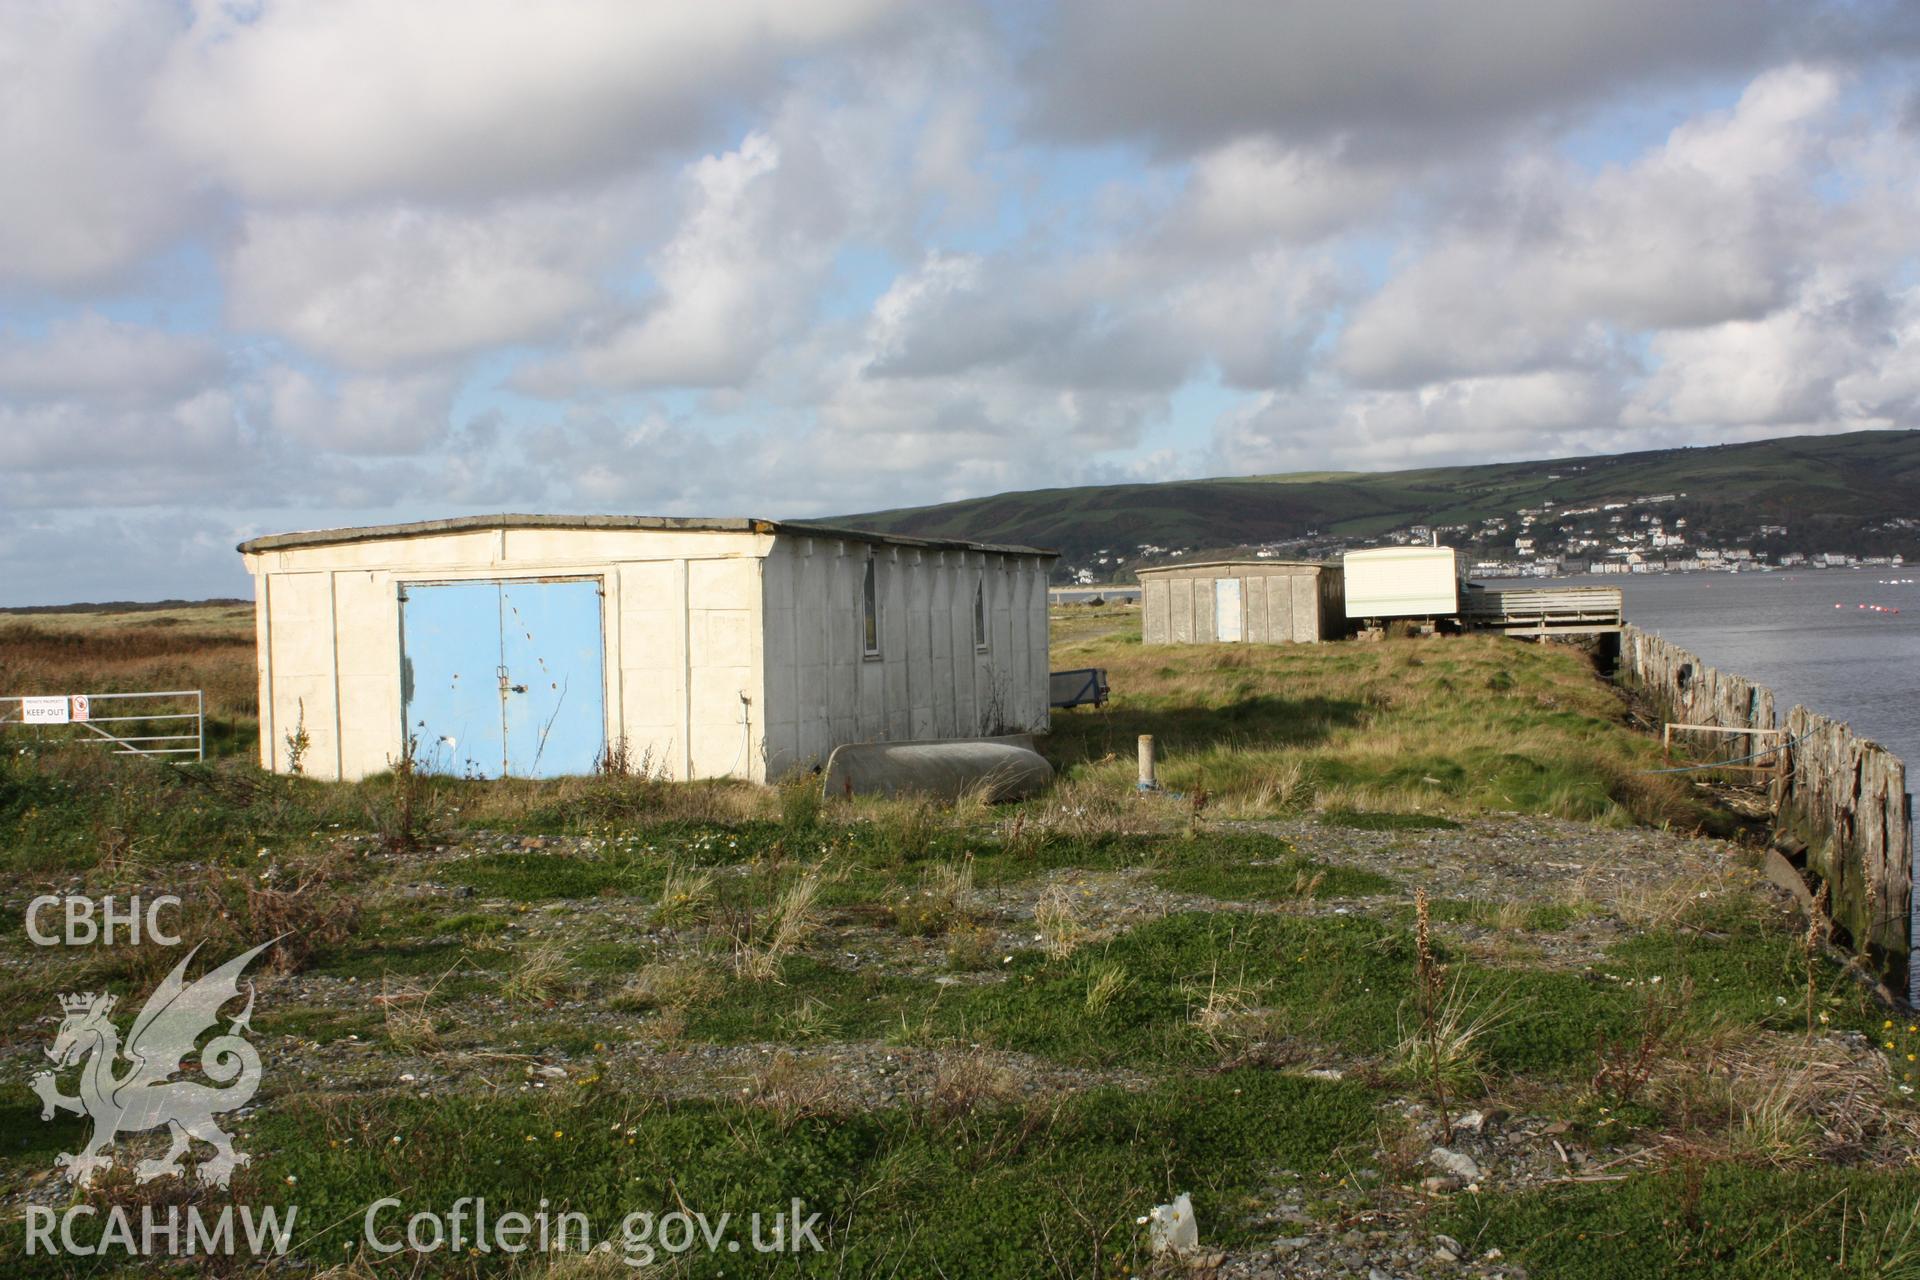 Hut (in background) with associated mobile home and exterior decked-area spanning the degraded wharf front.